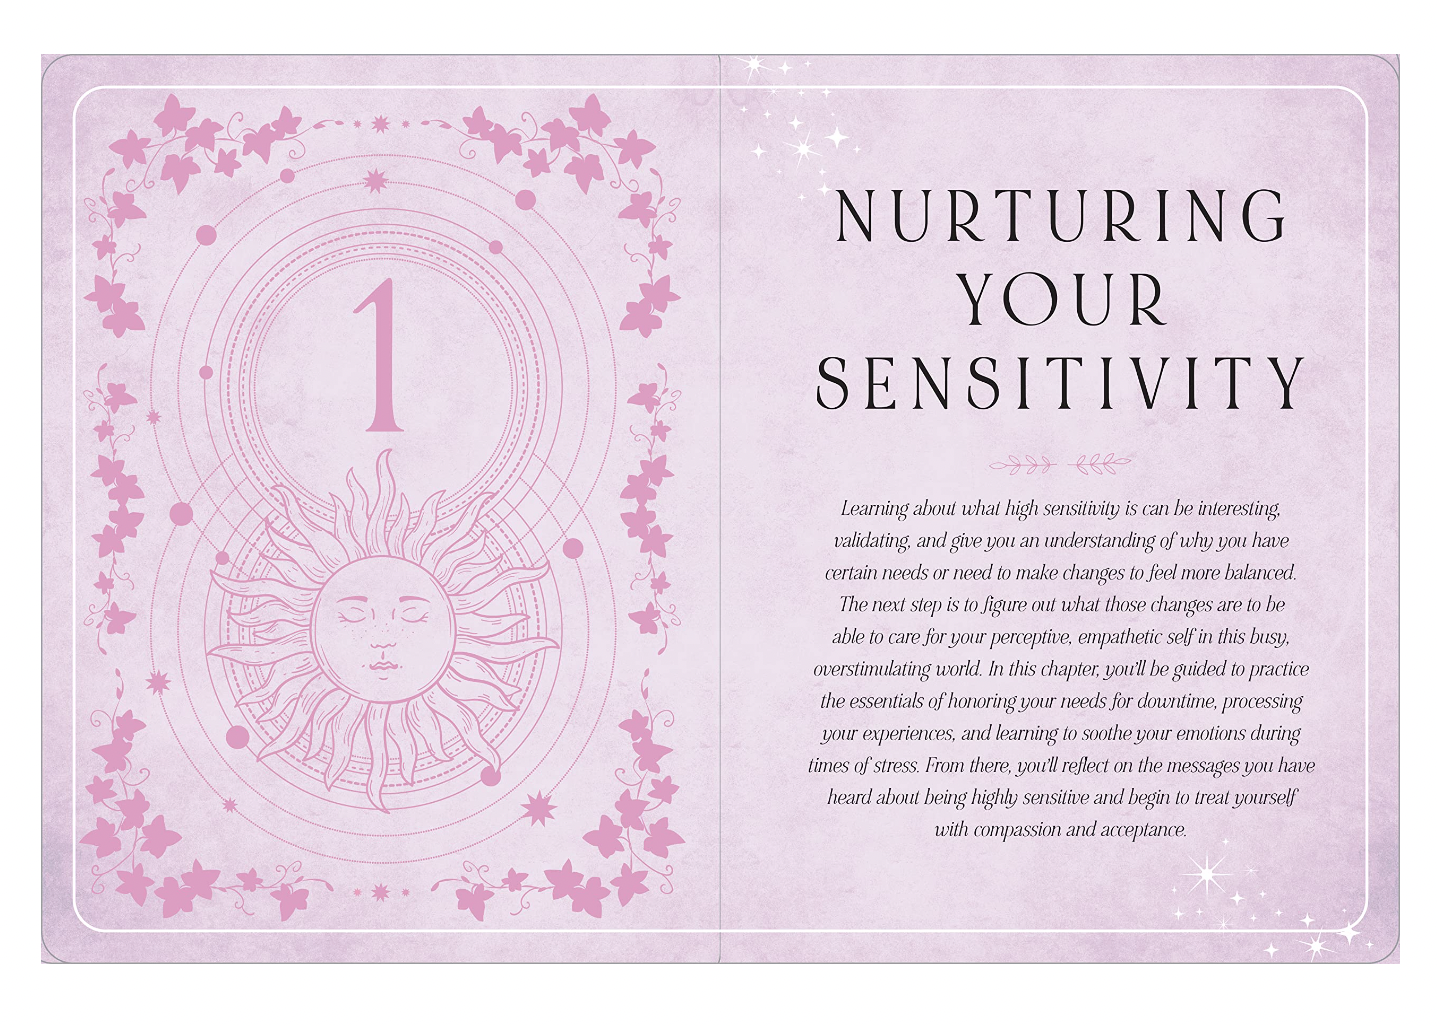 Find Your Strength: A Workbook for the Highly Sensitive Person